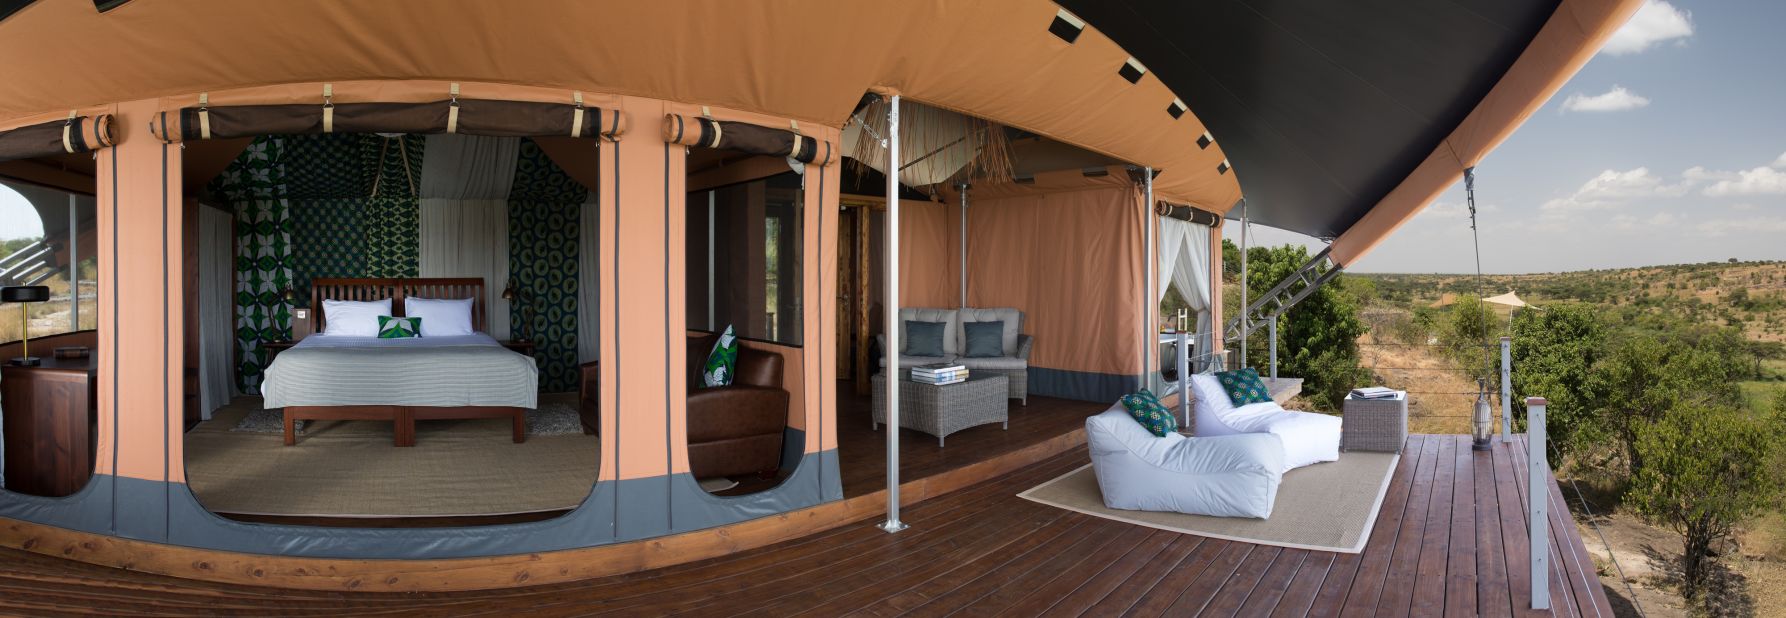 All 12 "tents" at Richard Branson's Mahali Mzuri camp come with canopied verandas replete with roll-top bath tubs and infinity pools. 